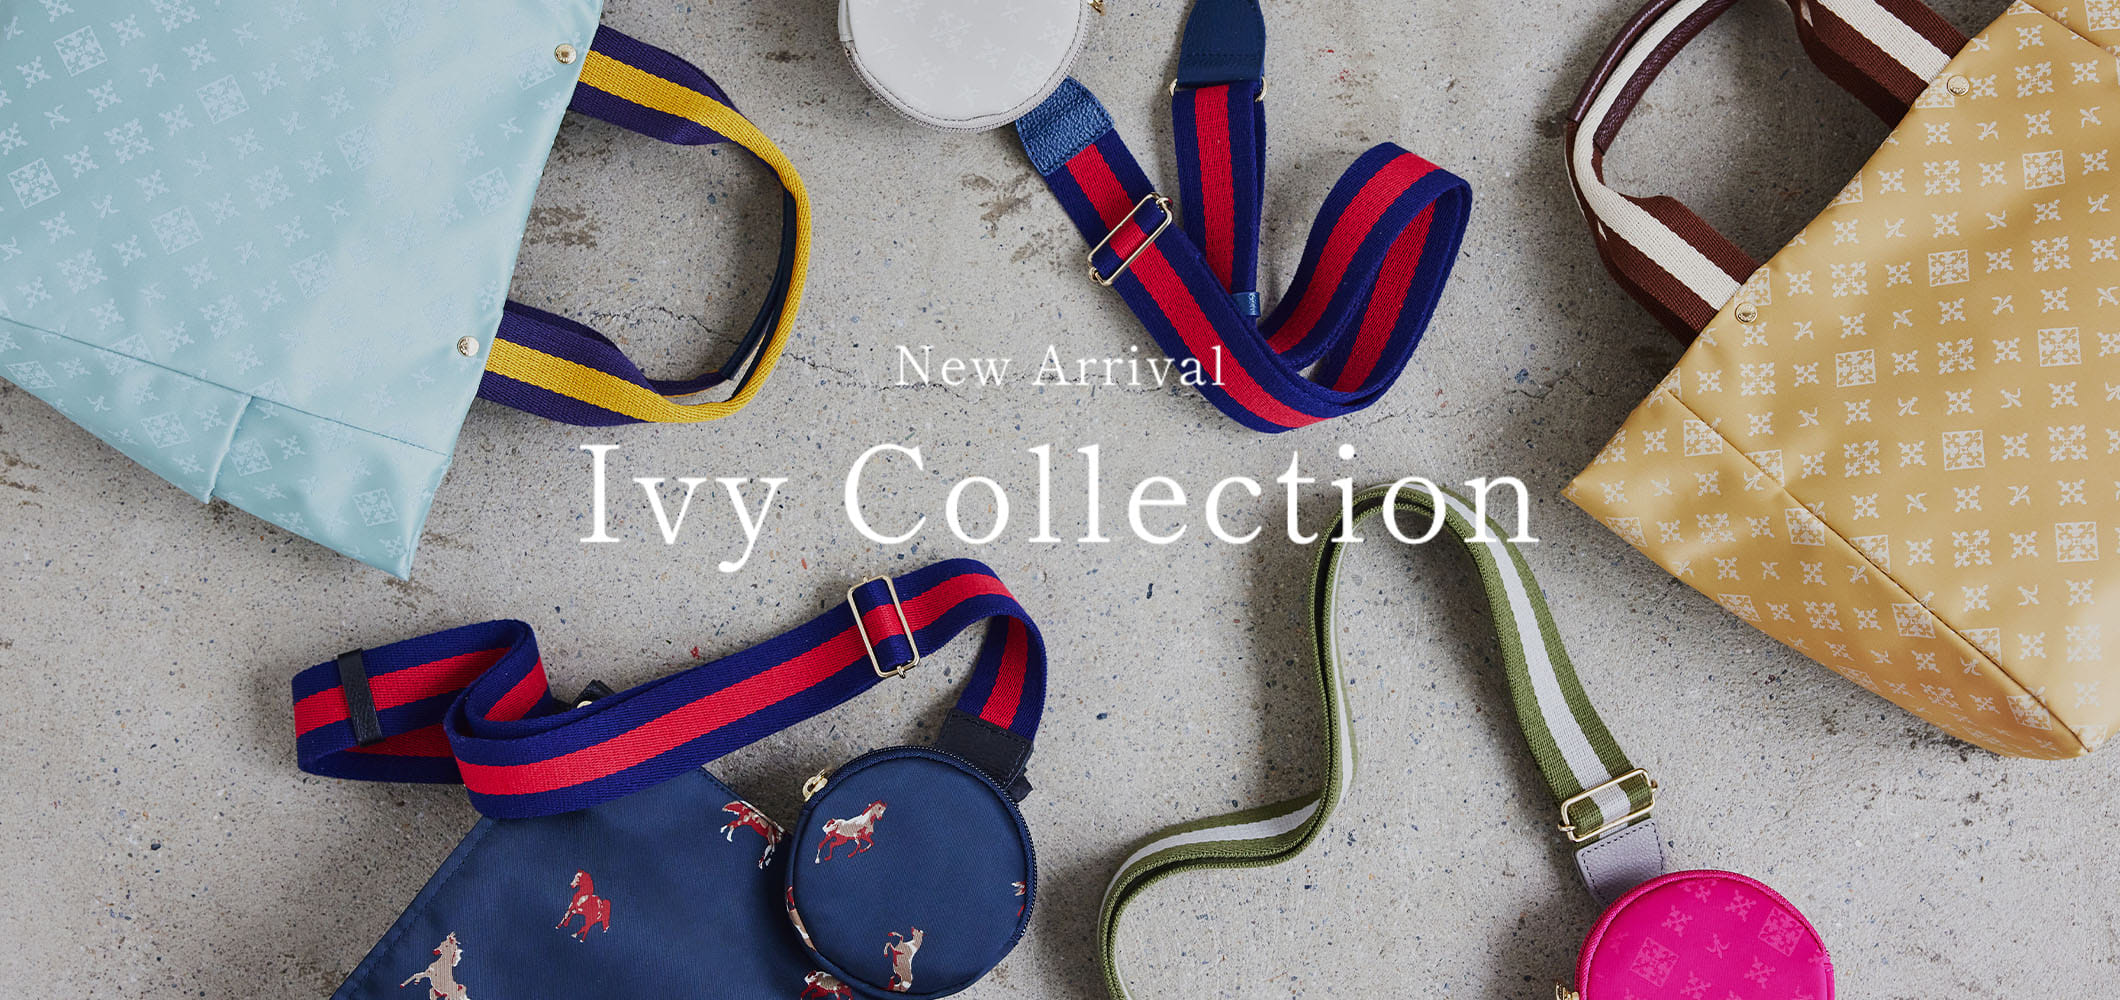 Ivy Collection